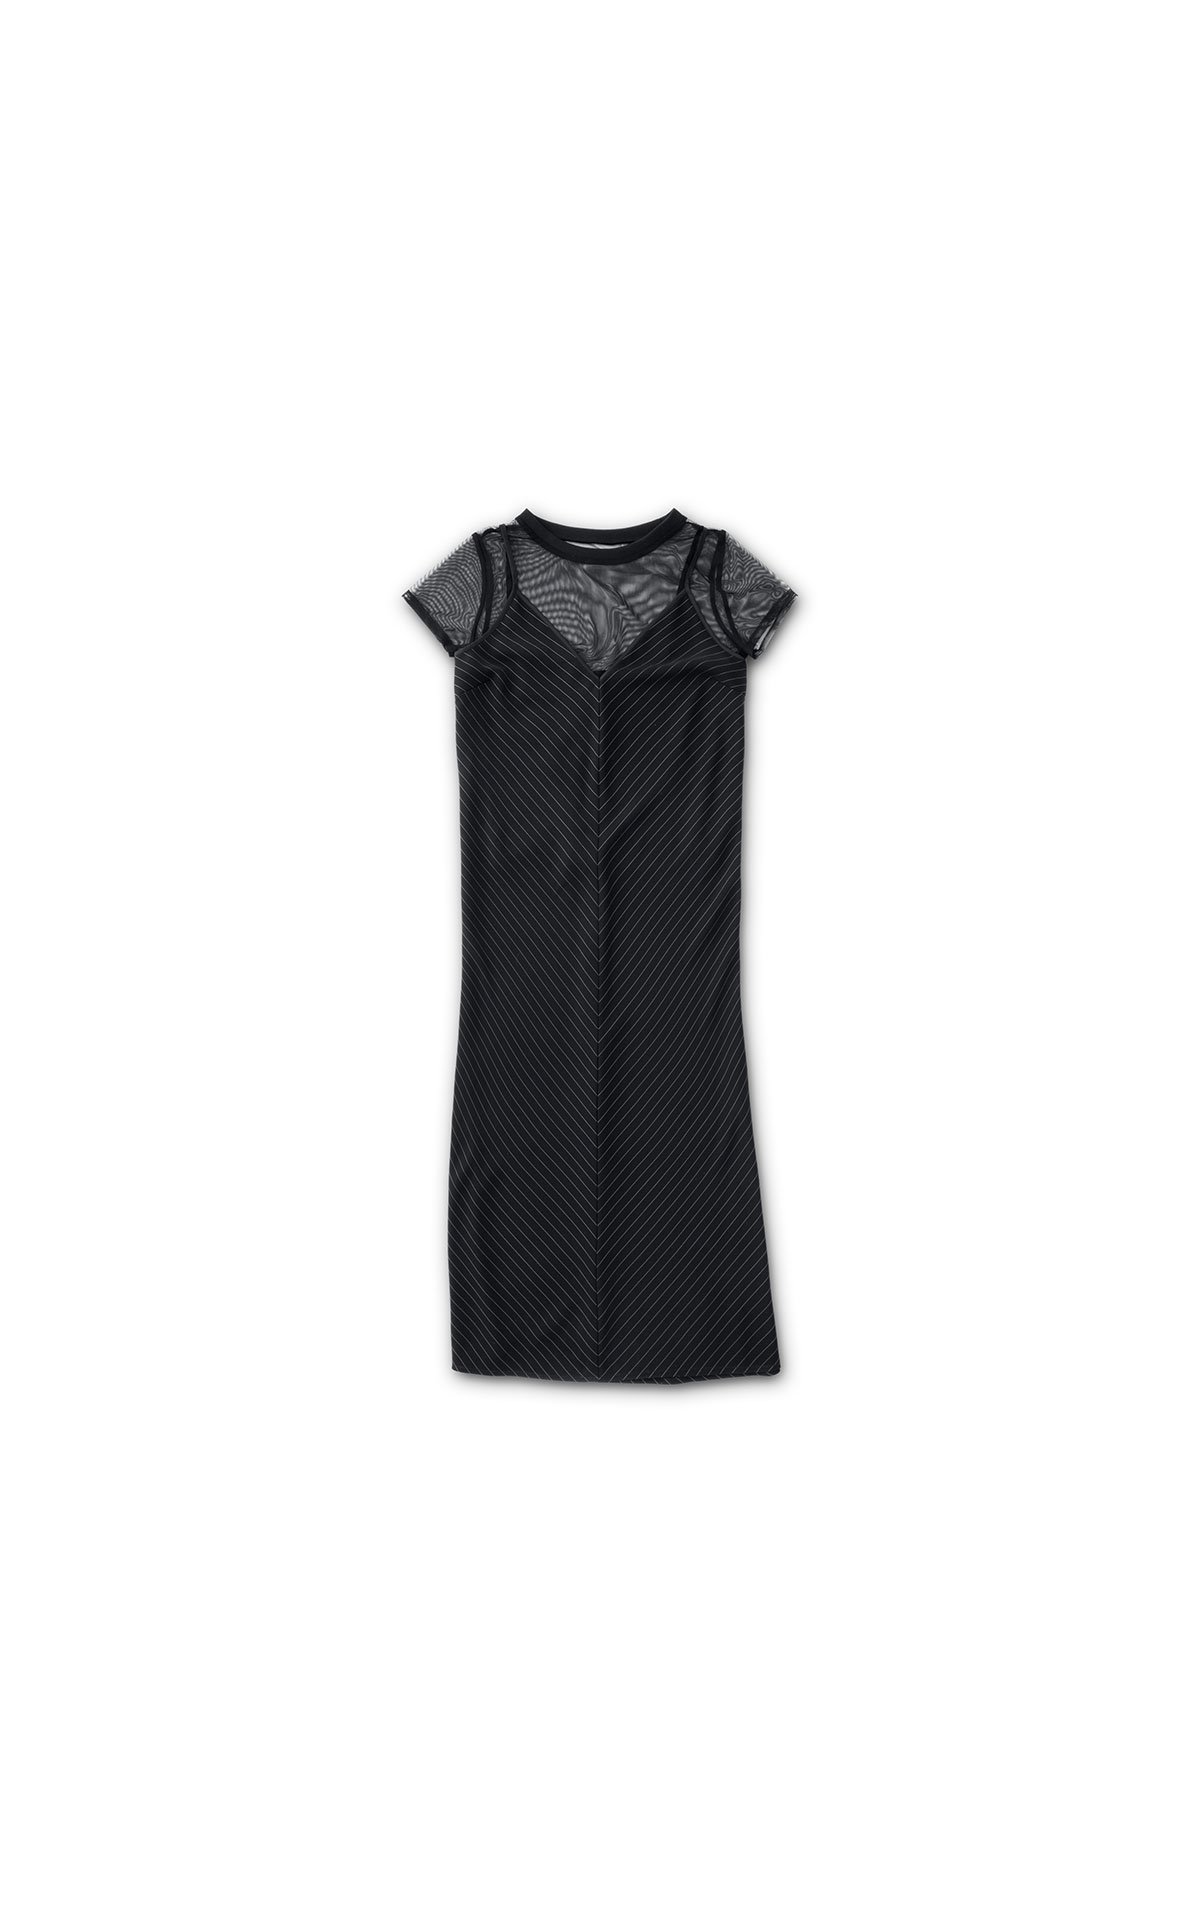 DKNY Sheer dress from Bicester Village